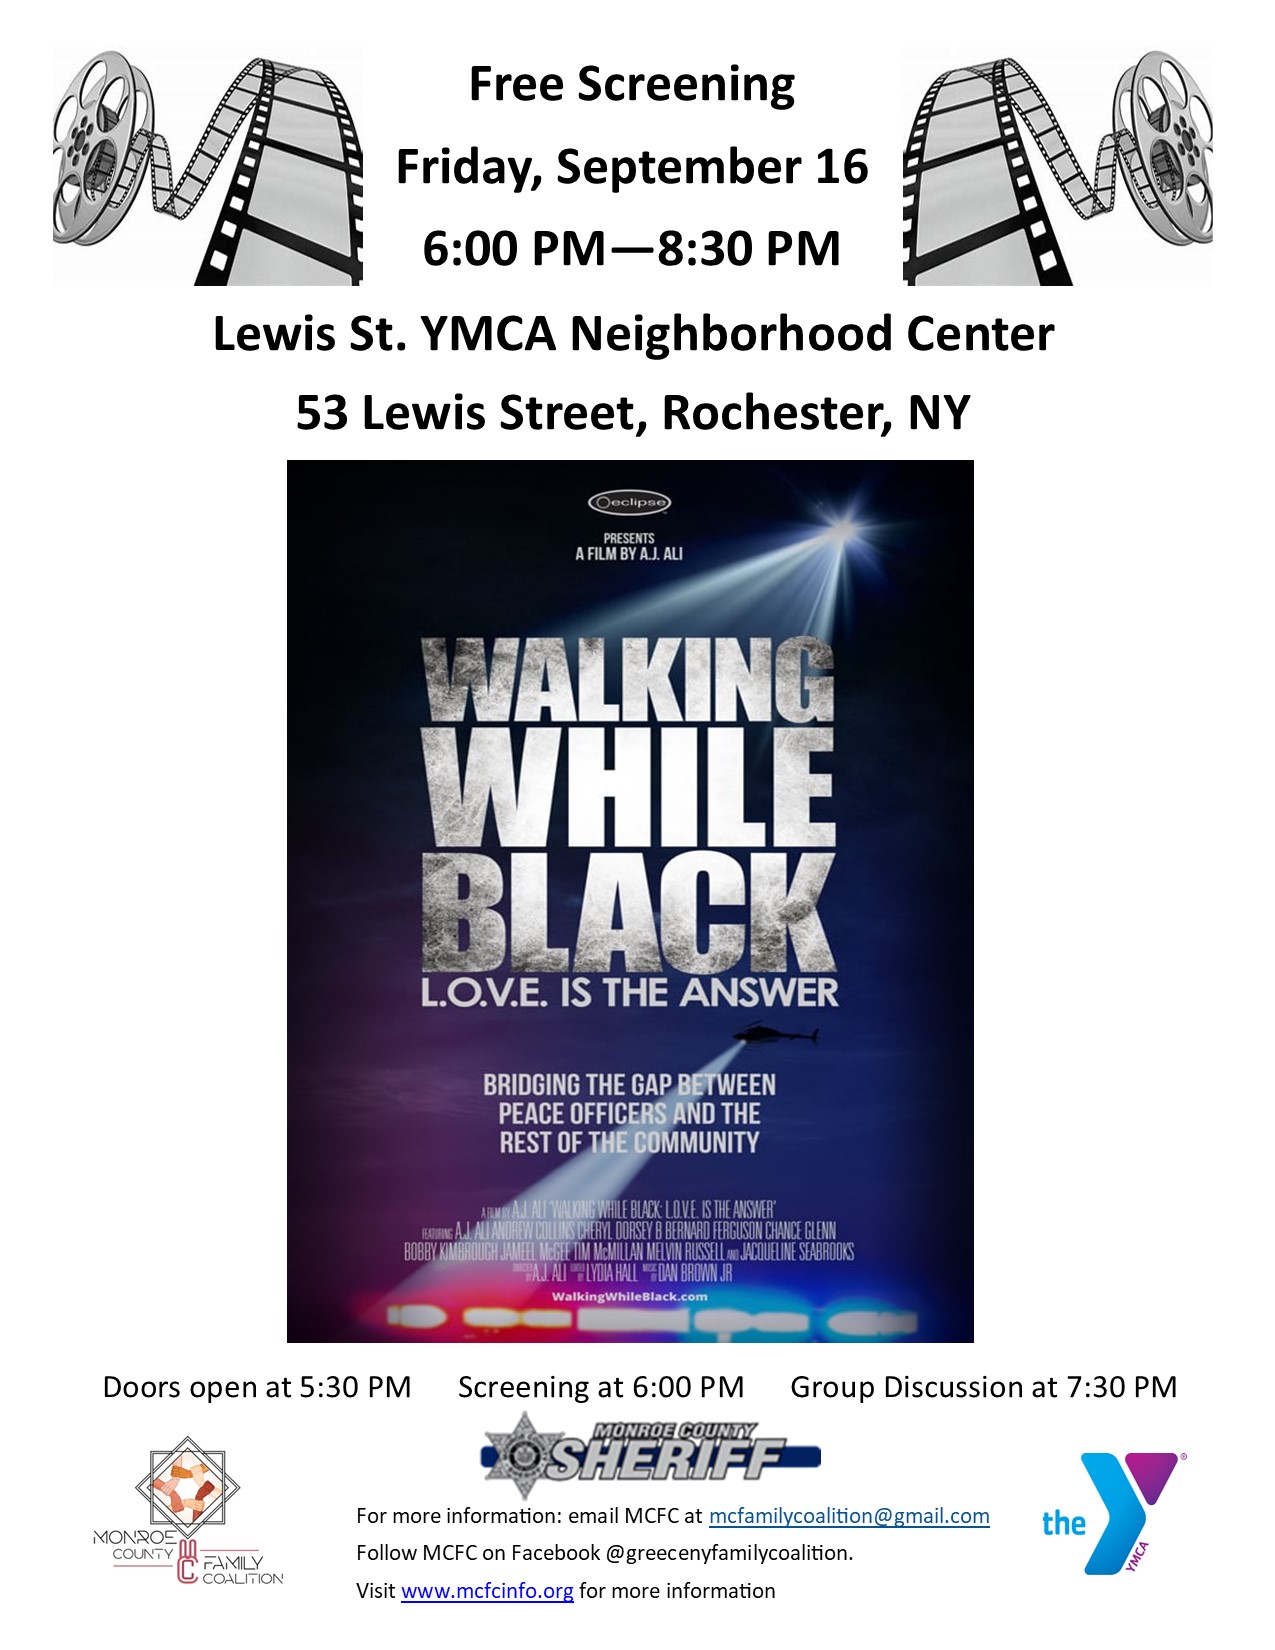 WALKING WHILE BLACK L.O.V.E. Is The Answer flyer (4).jpg